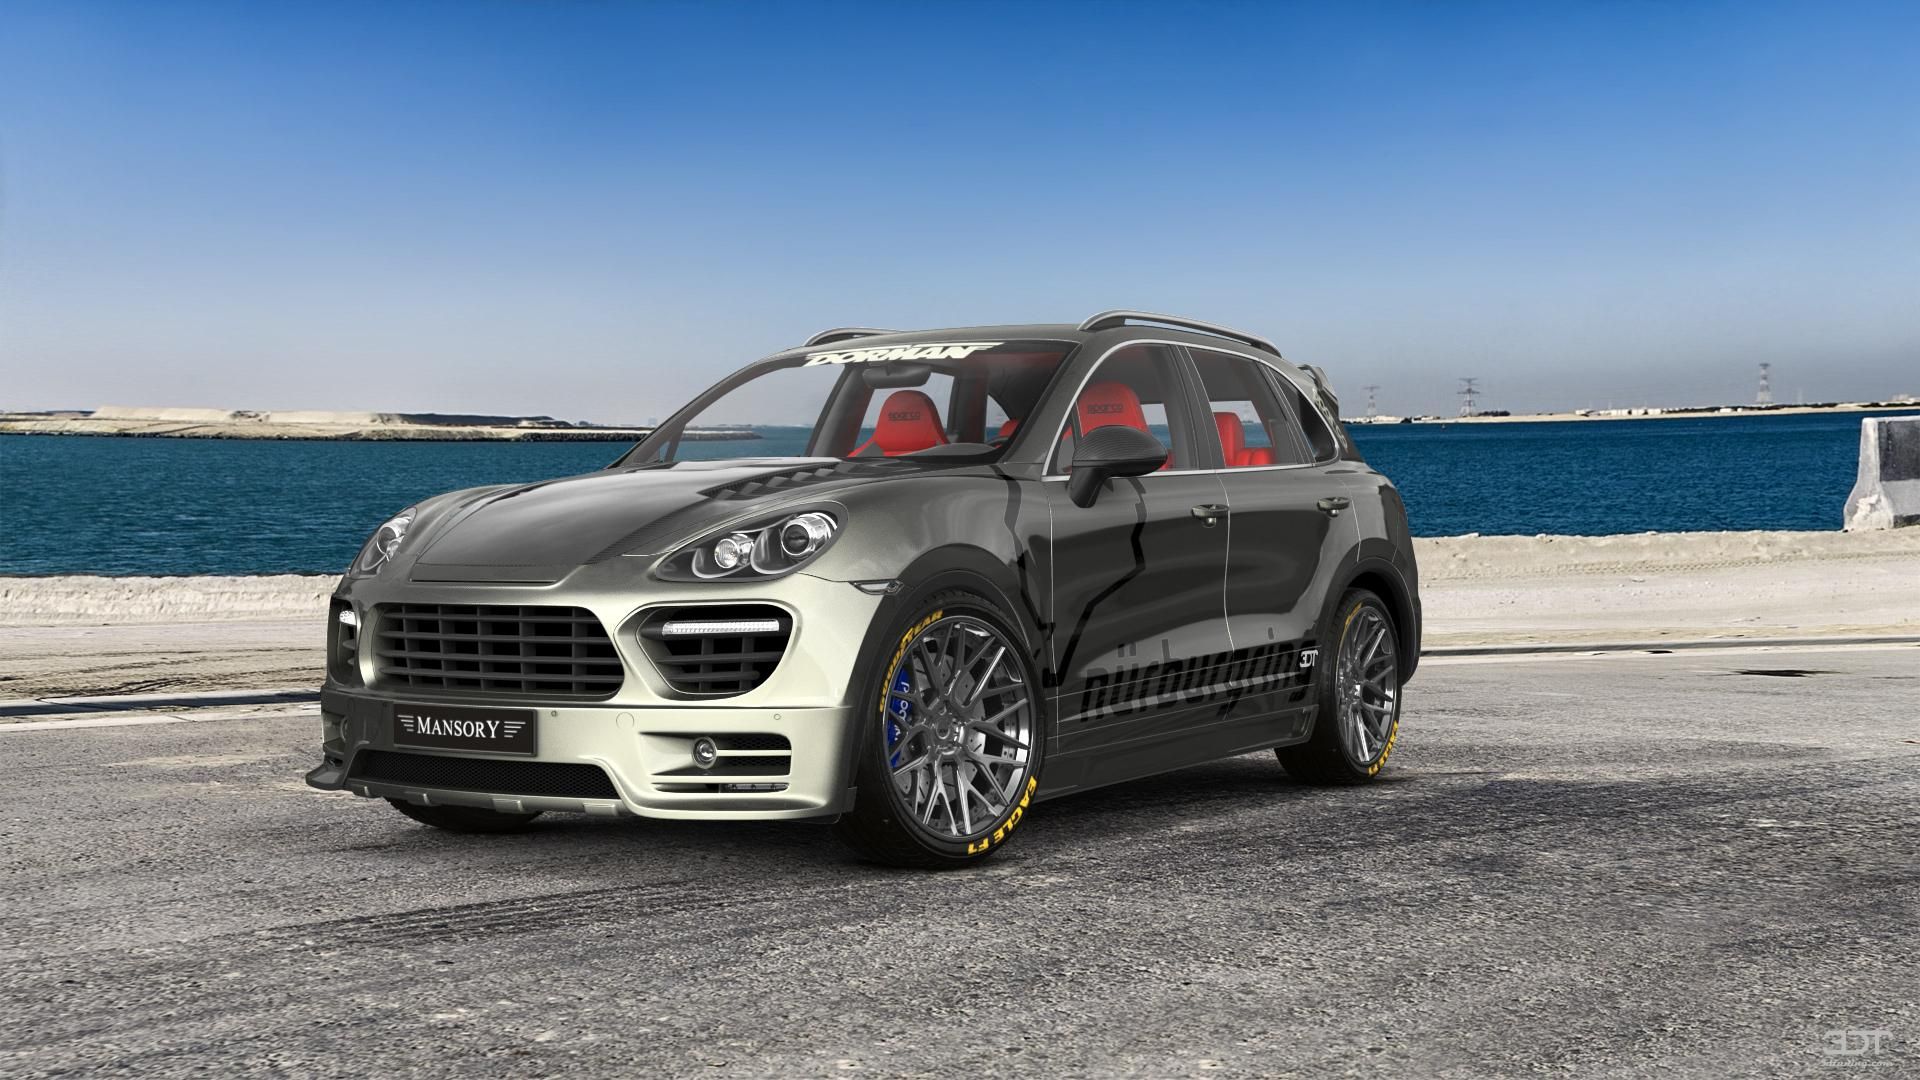 Checkout my tuning #Porsche #Cayenne 2012 at 3DTuning #3dtuning #tuning |  Porsche, Porsche cayenne, Luxury suv